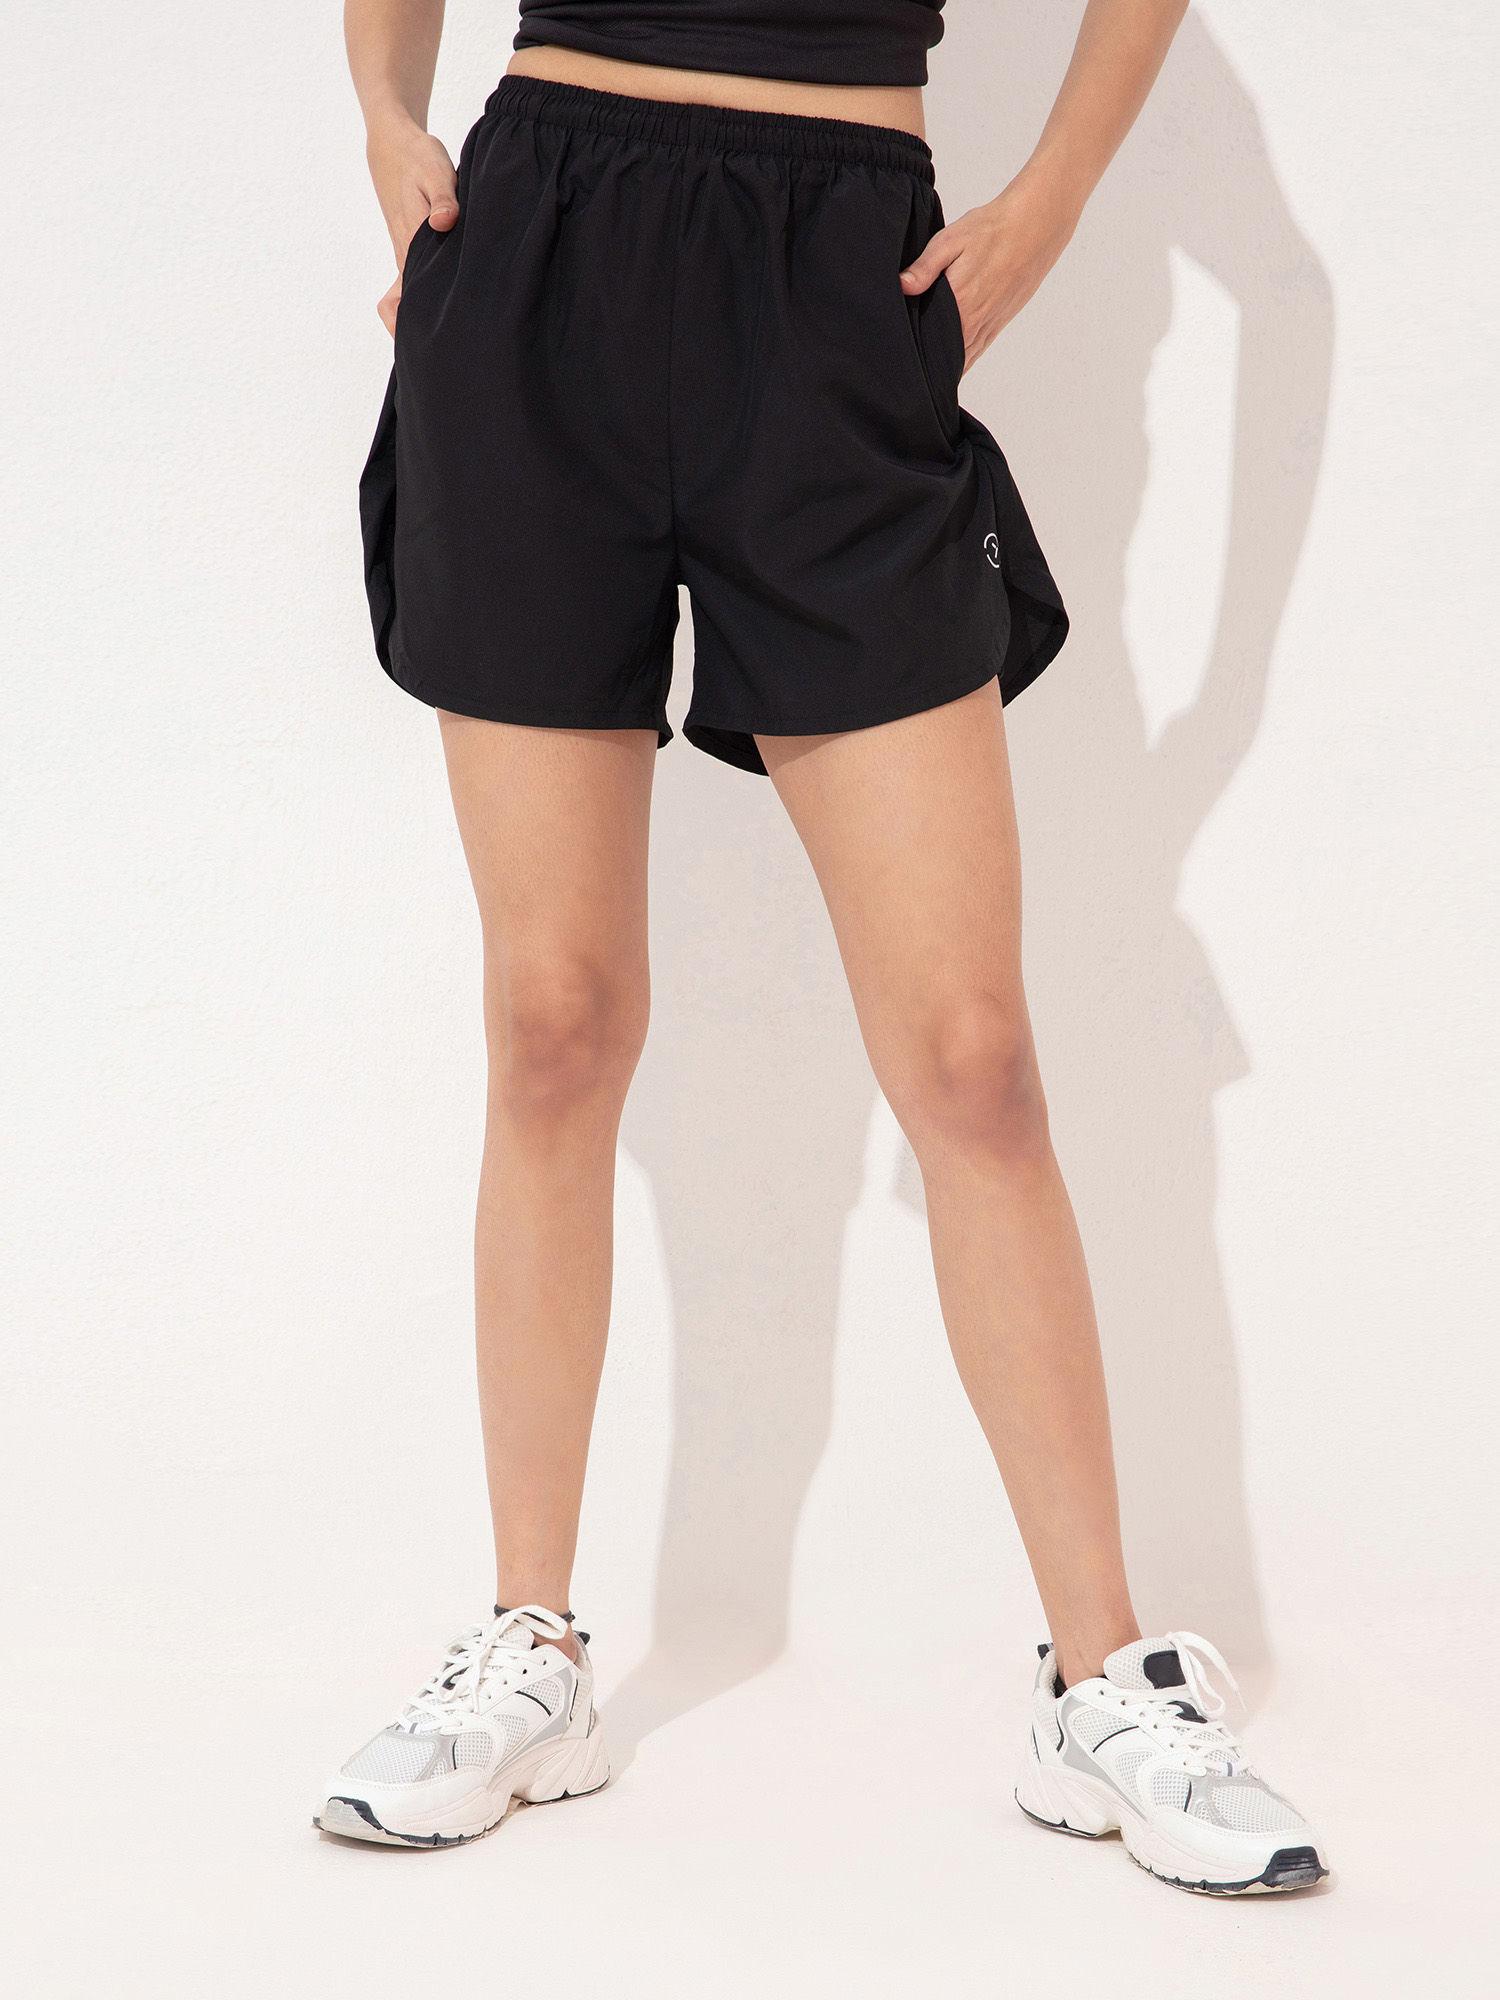 women running stride sports shorts with inner layer